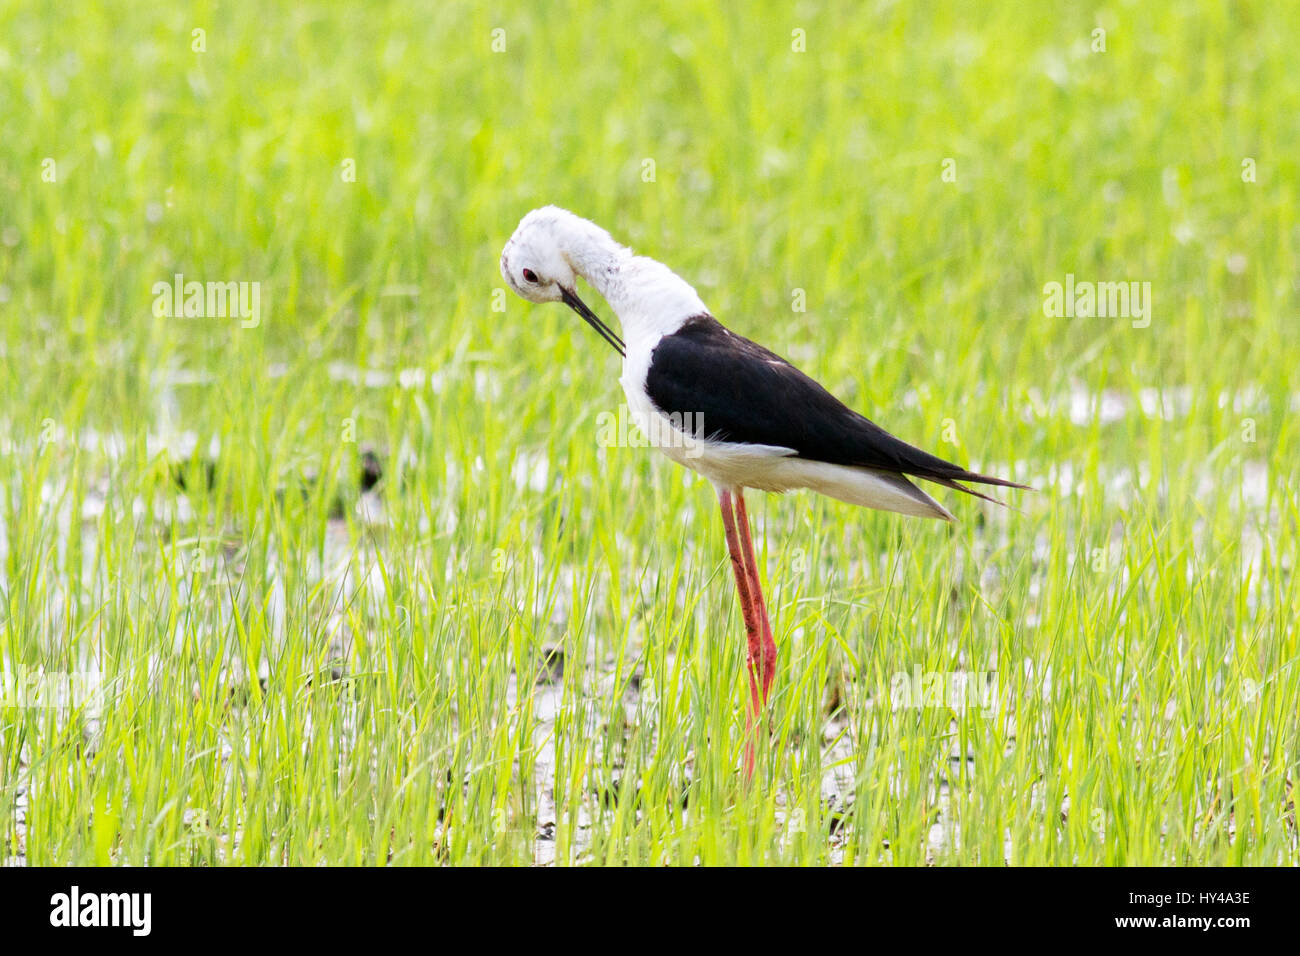 A juvenile Black-winged Stilt (Himantopu himantopus) preening itself in a field of young rice in central Thailand Stock Photo